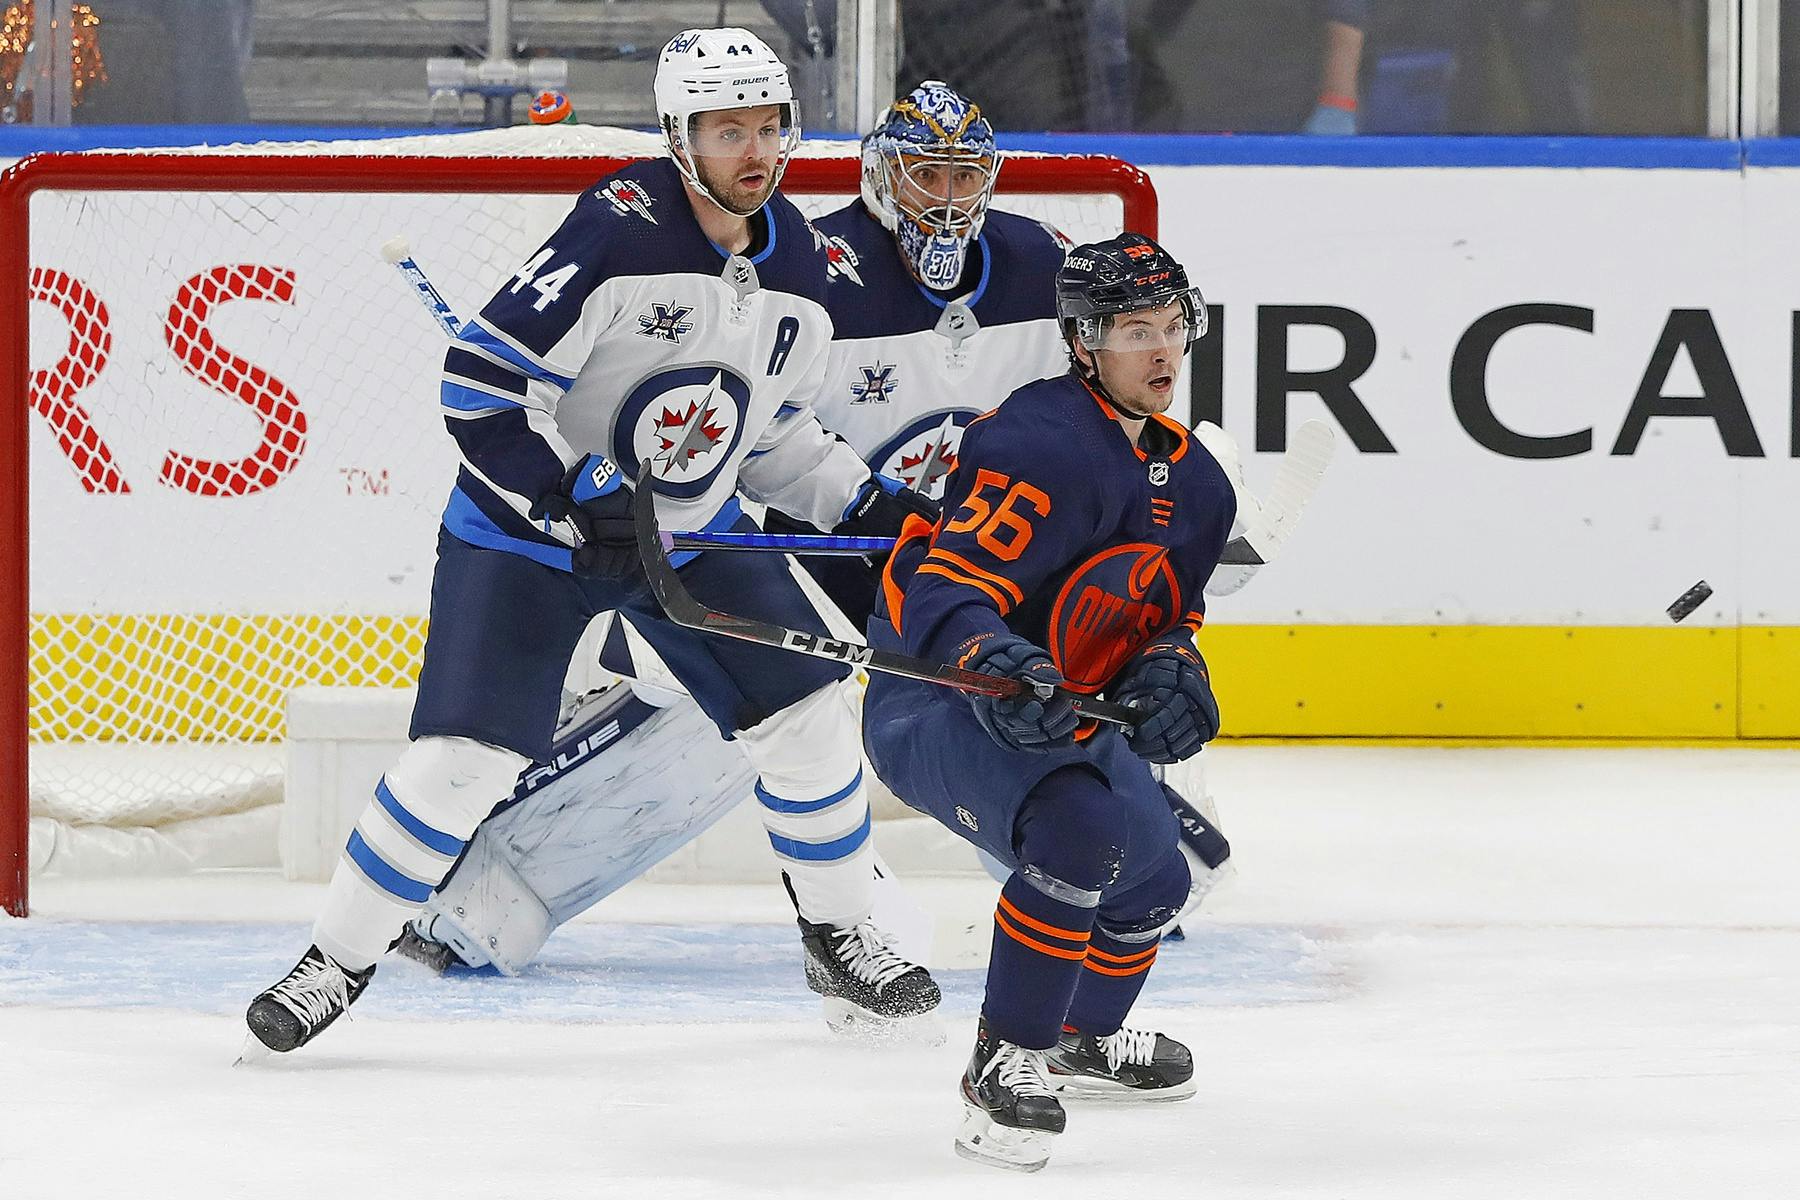 Kailer Yamamoto thrilled with the opportunity to return to his